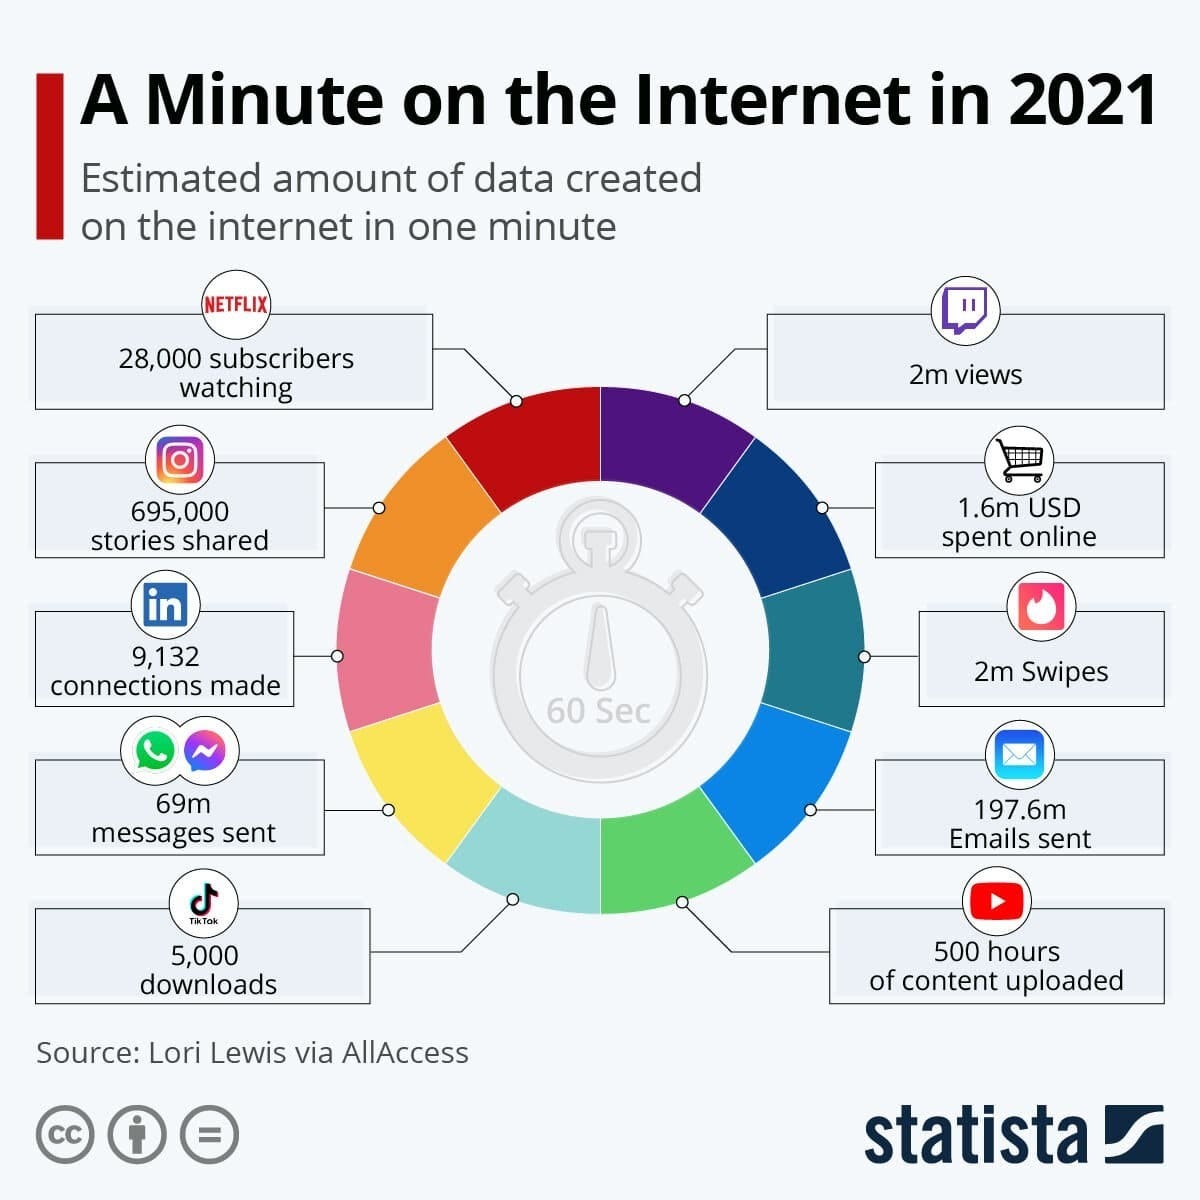 A minute on the internet